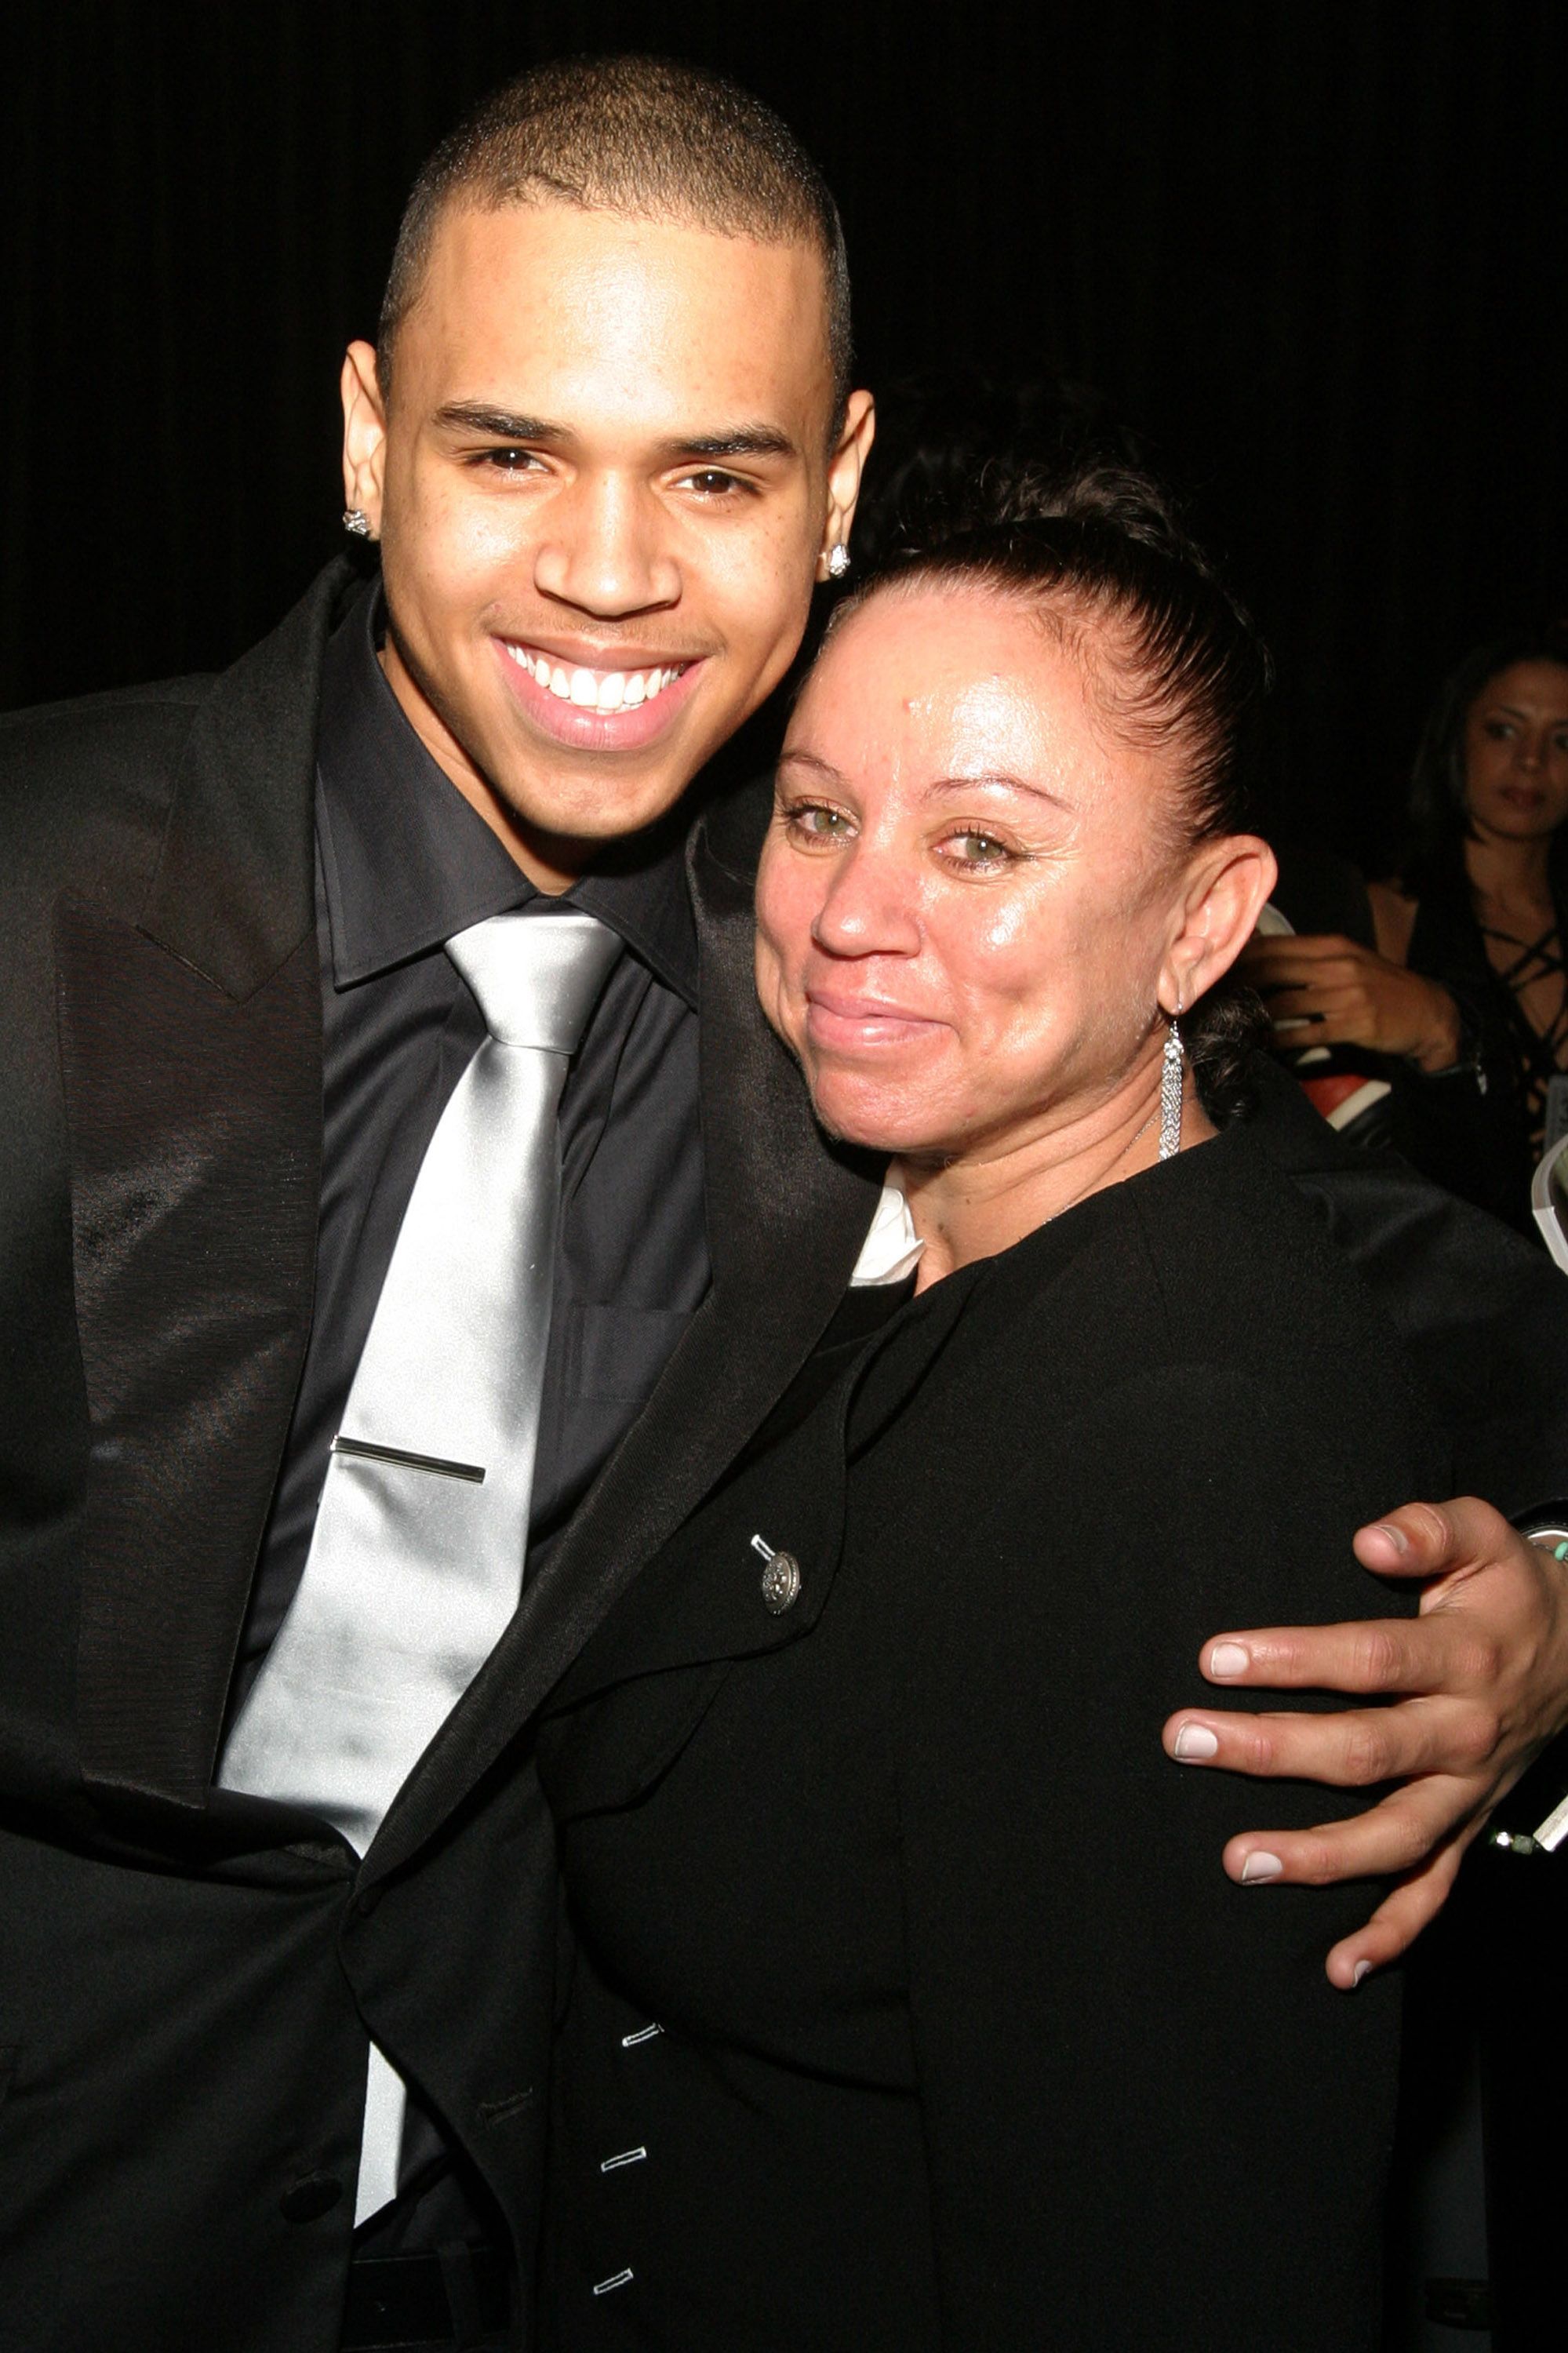 Chris Brown with his mother Joyce Hawkins at the the 37th Annual NAACP Image Awards in 2005. | Photo: Getty Images